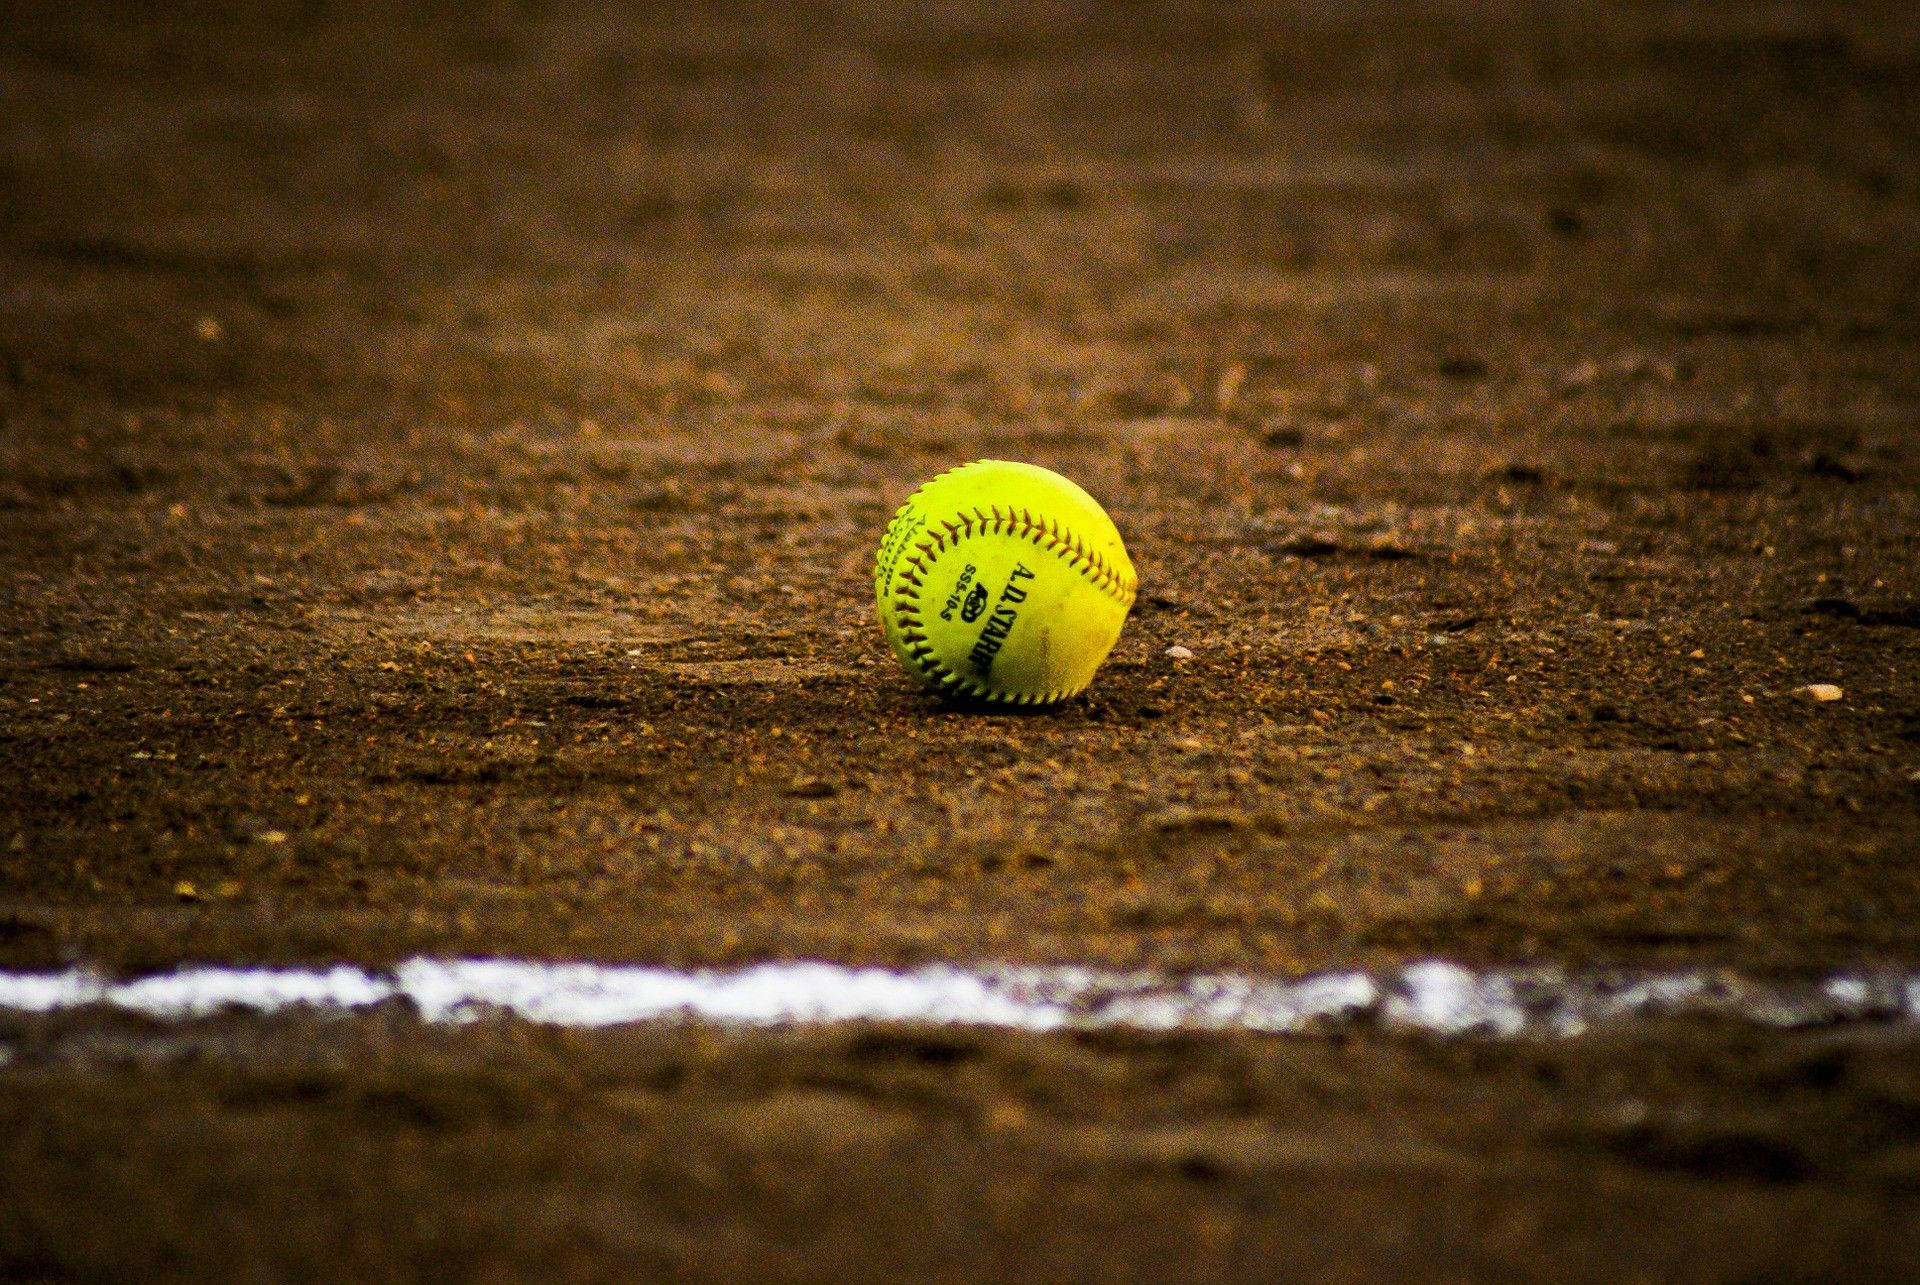 Softball In The Middle Of Field Wallpaper